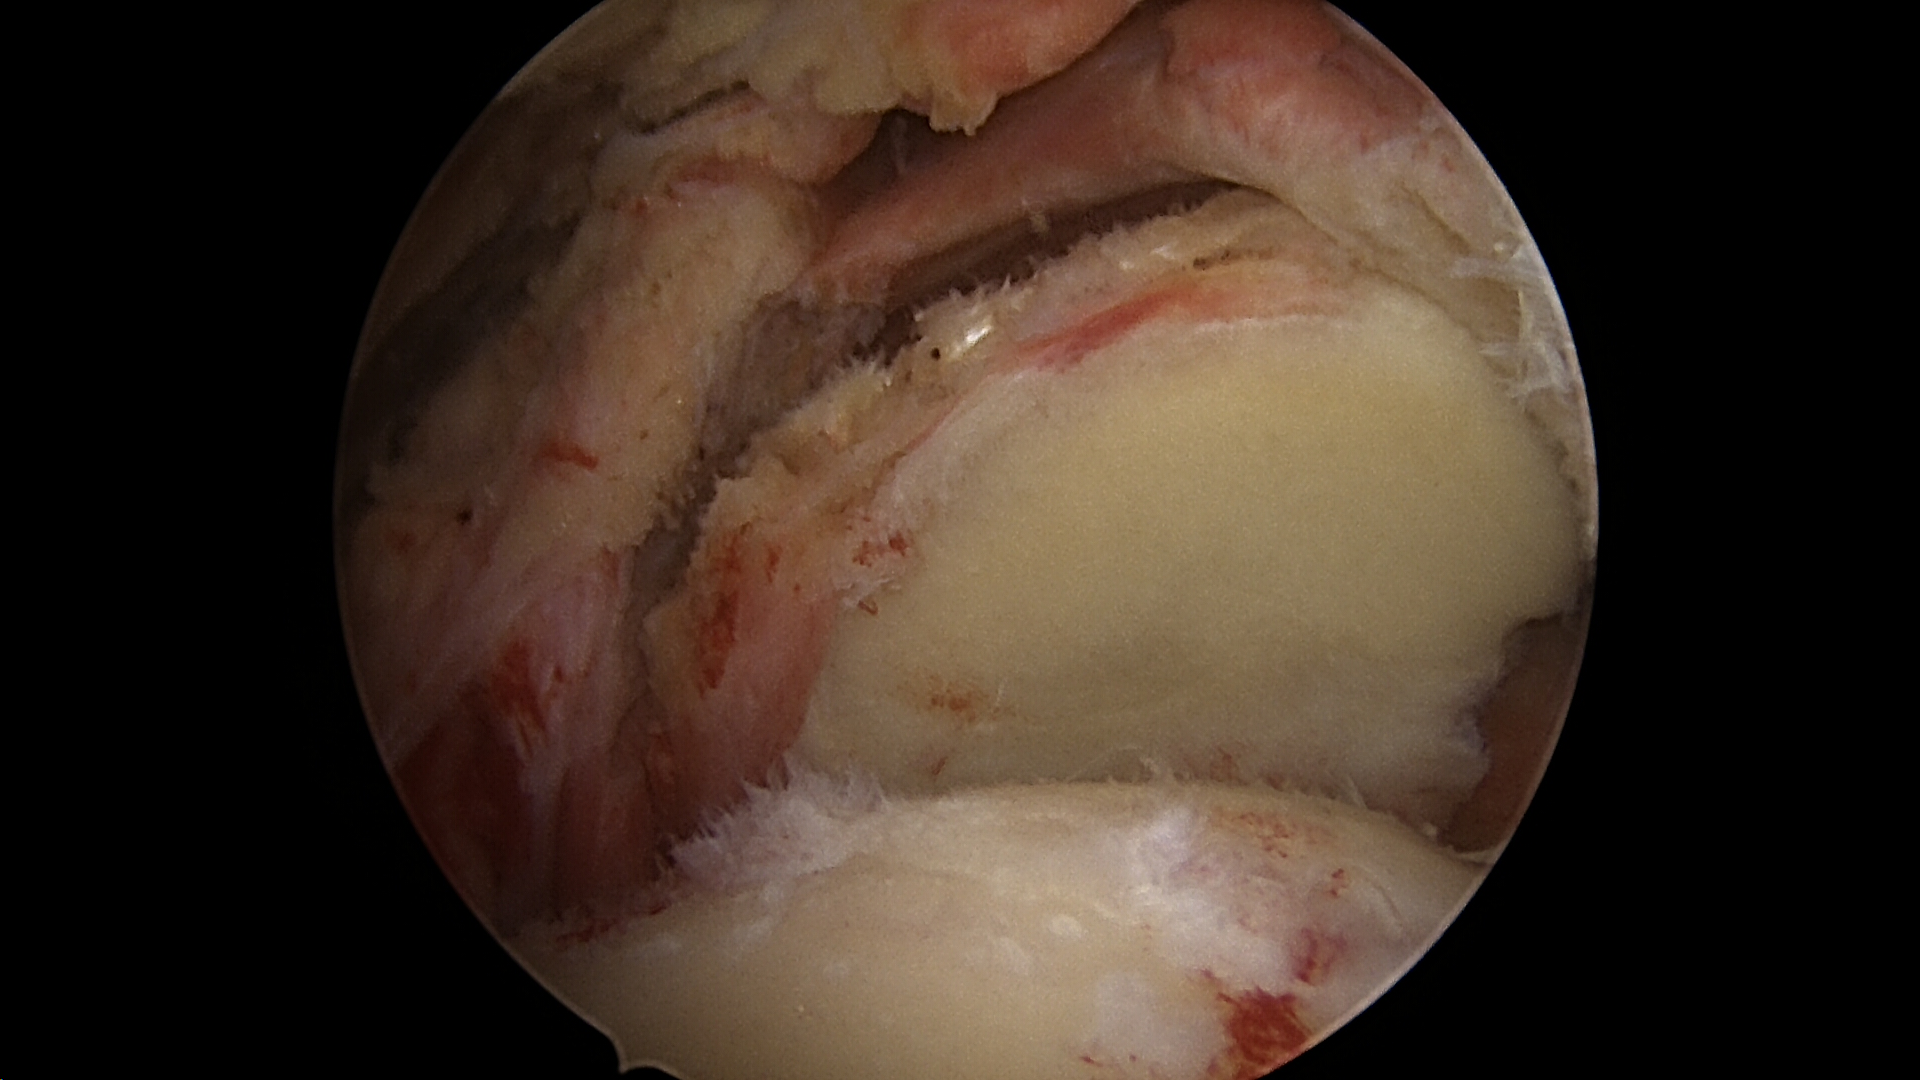 Massive retracted irreparable rotator cuff tear viewed from the lateral portal